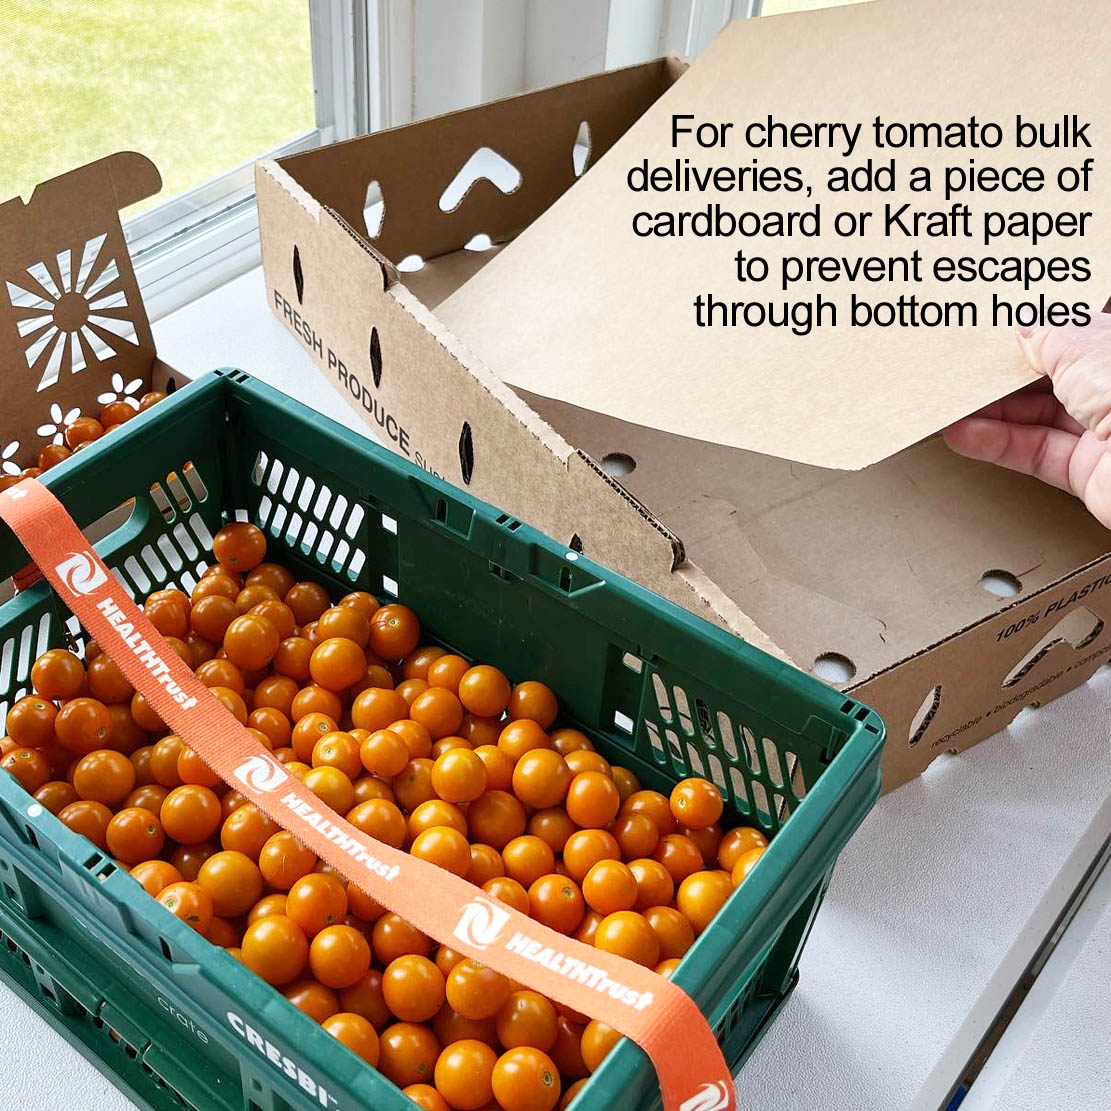 https://sustainableproducecontainer.com/wp-content/uploads/2022/01/master-tray-add-cardboard-for-bulk-tomatoes.jpg